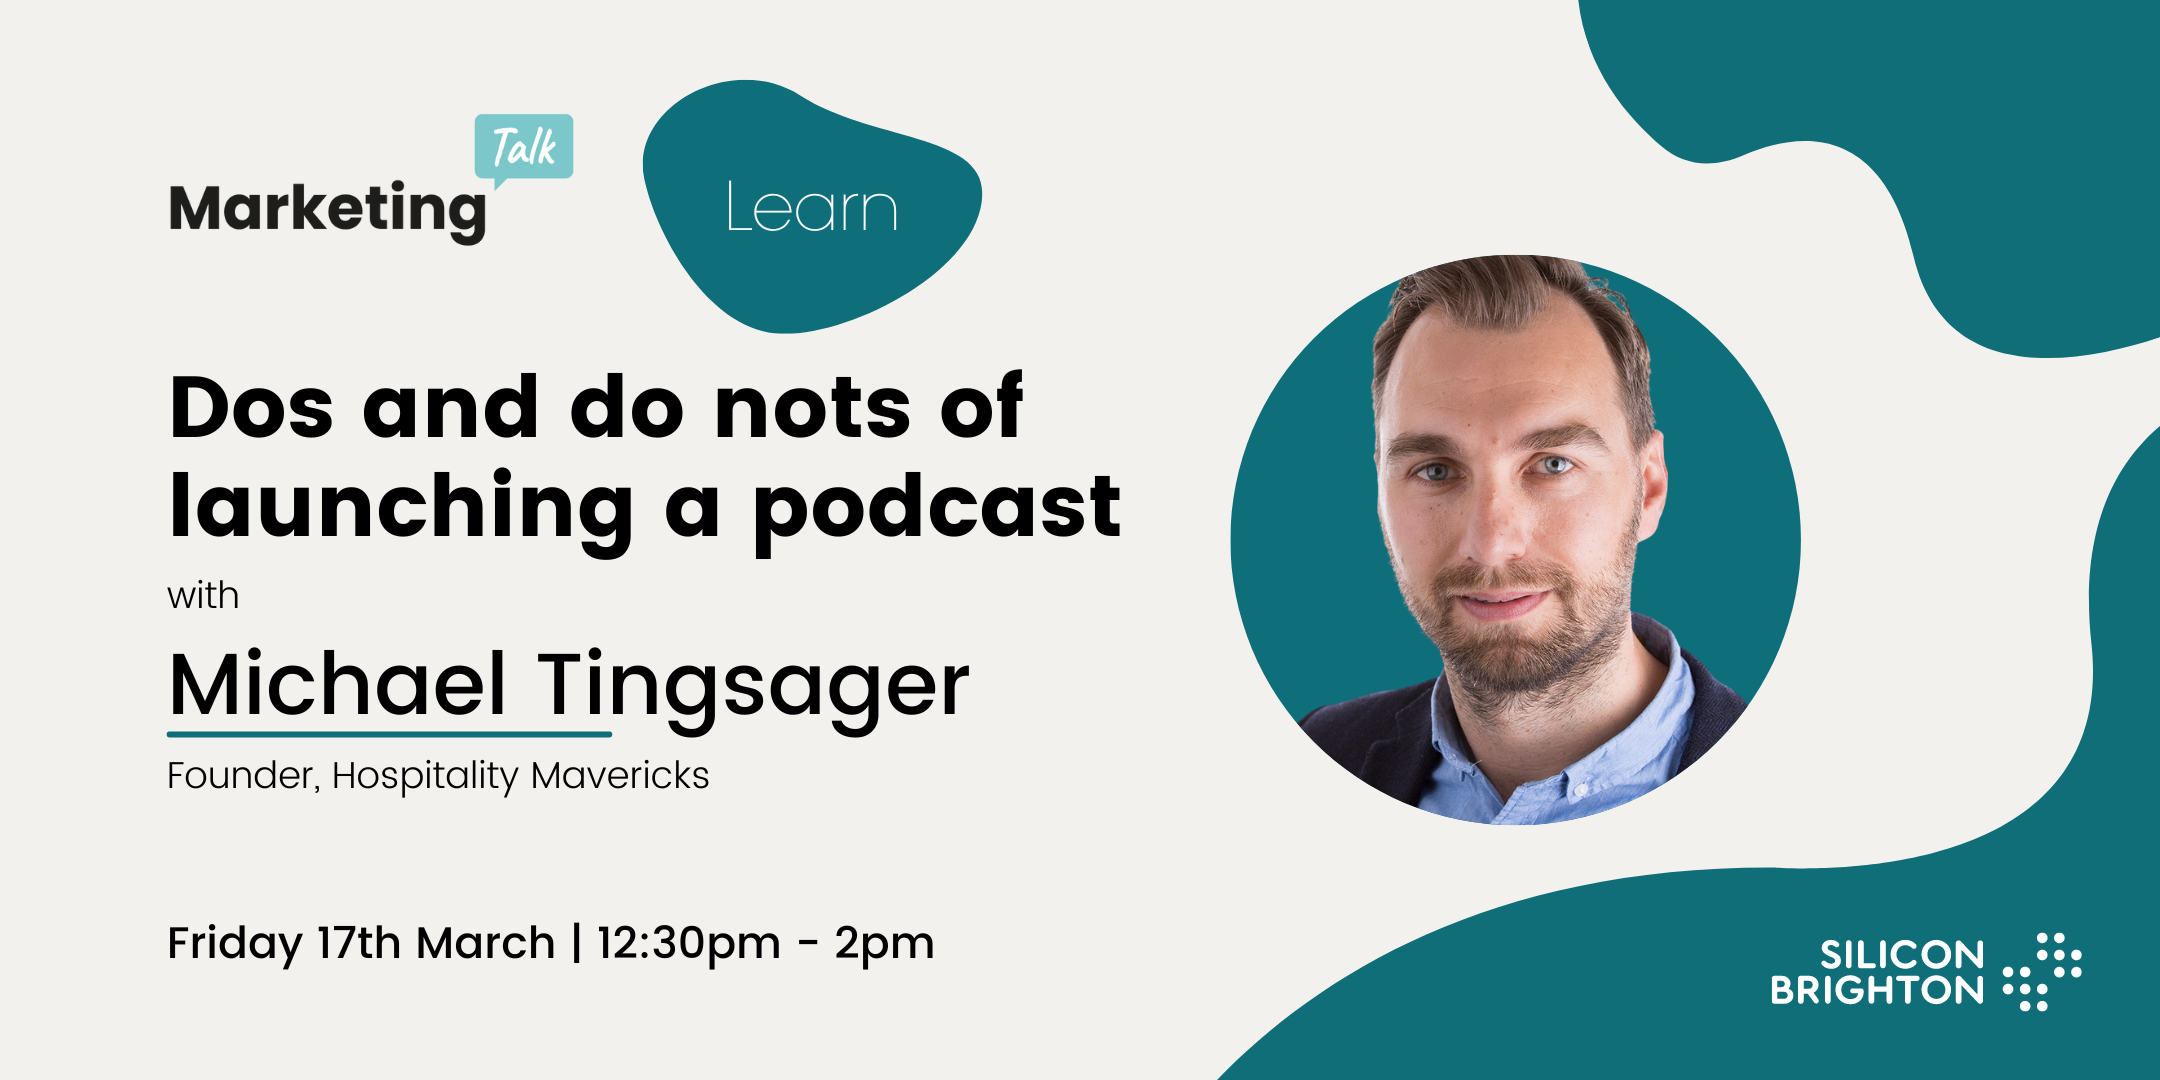 Marketing Talk: Dos and do nots of launching a podcast